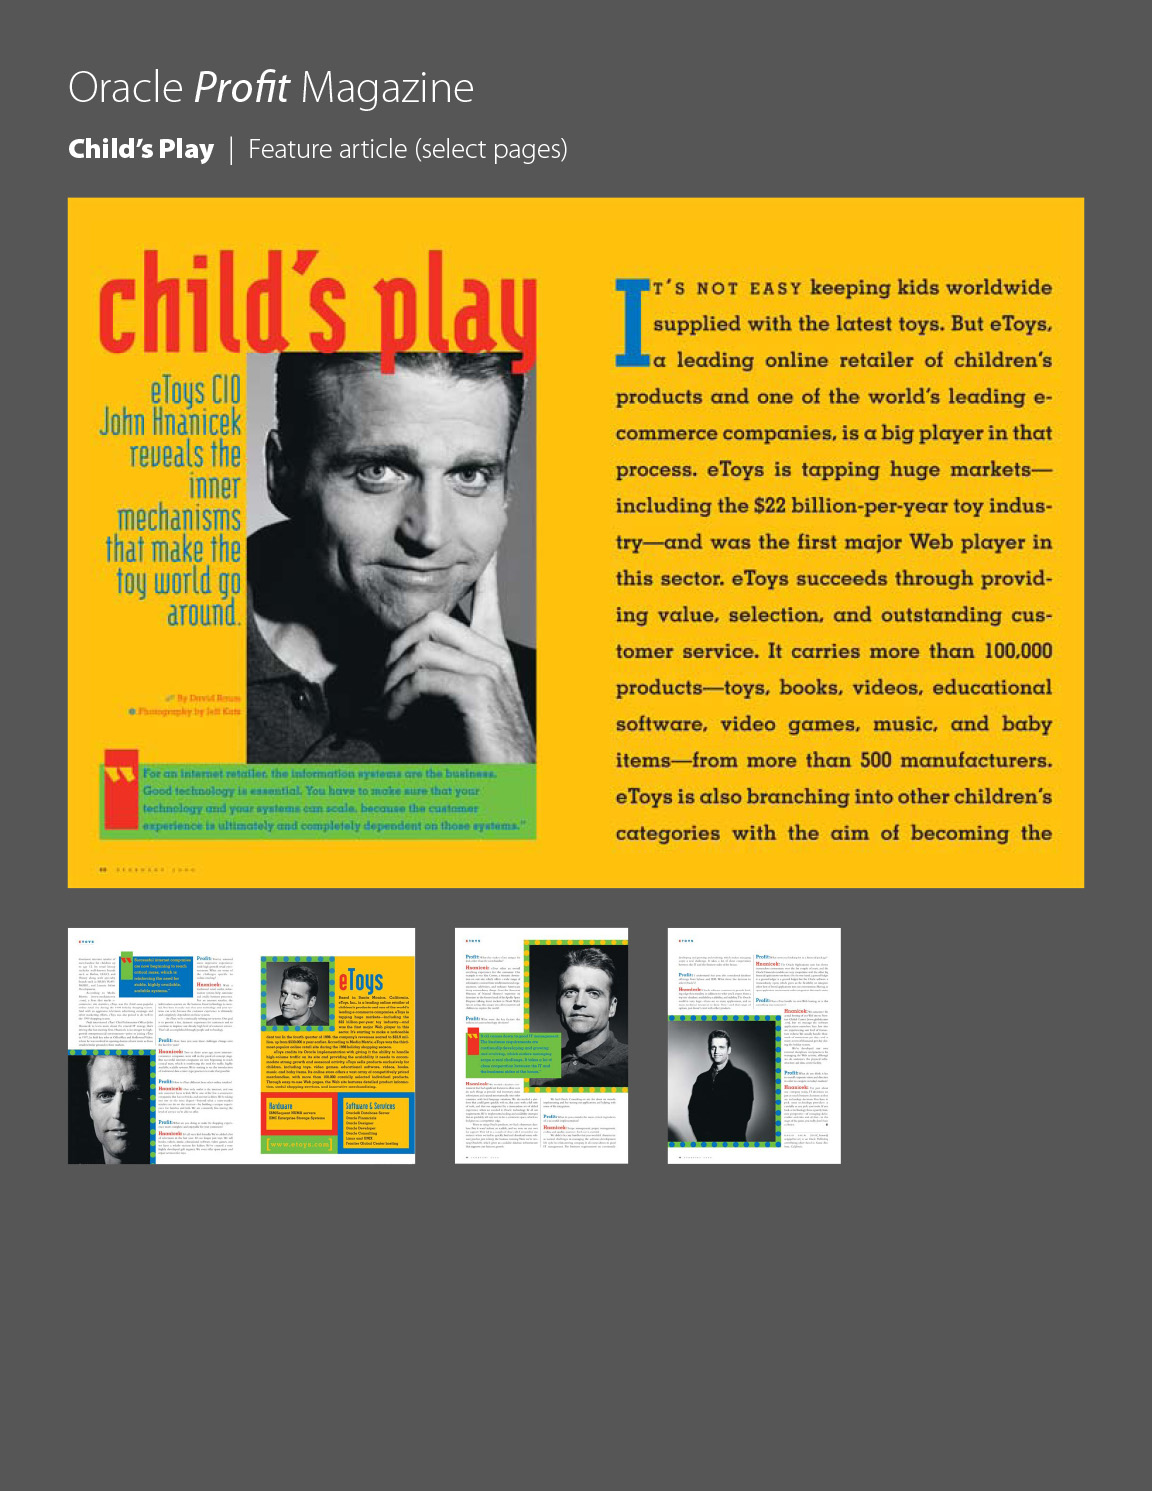 Oracle Profit magazine feature article, Child's Play